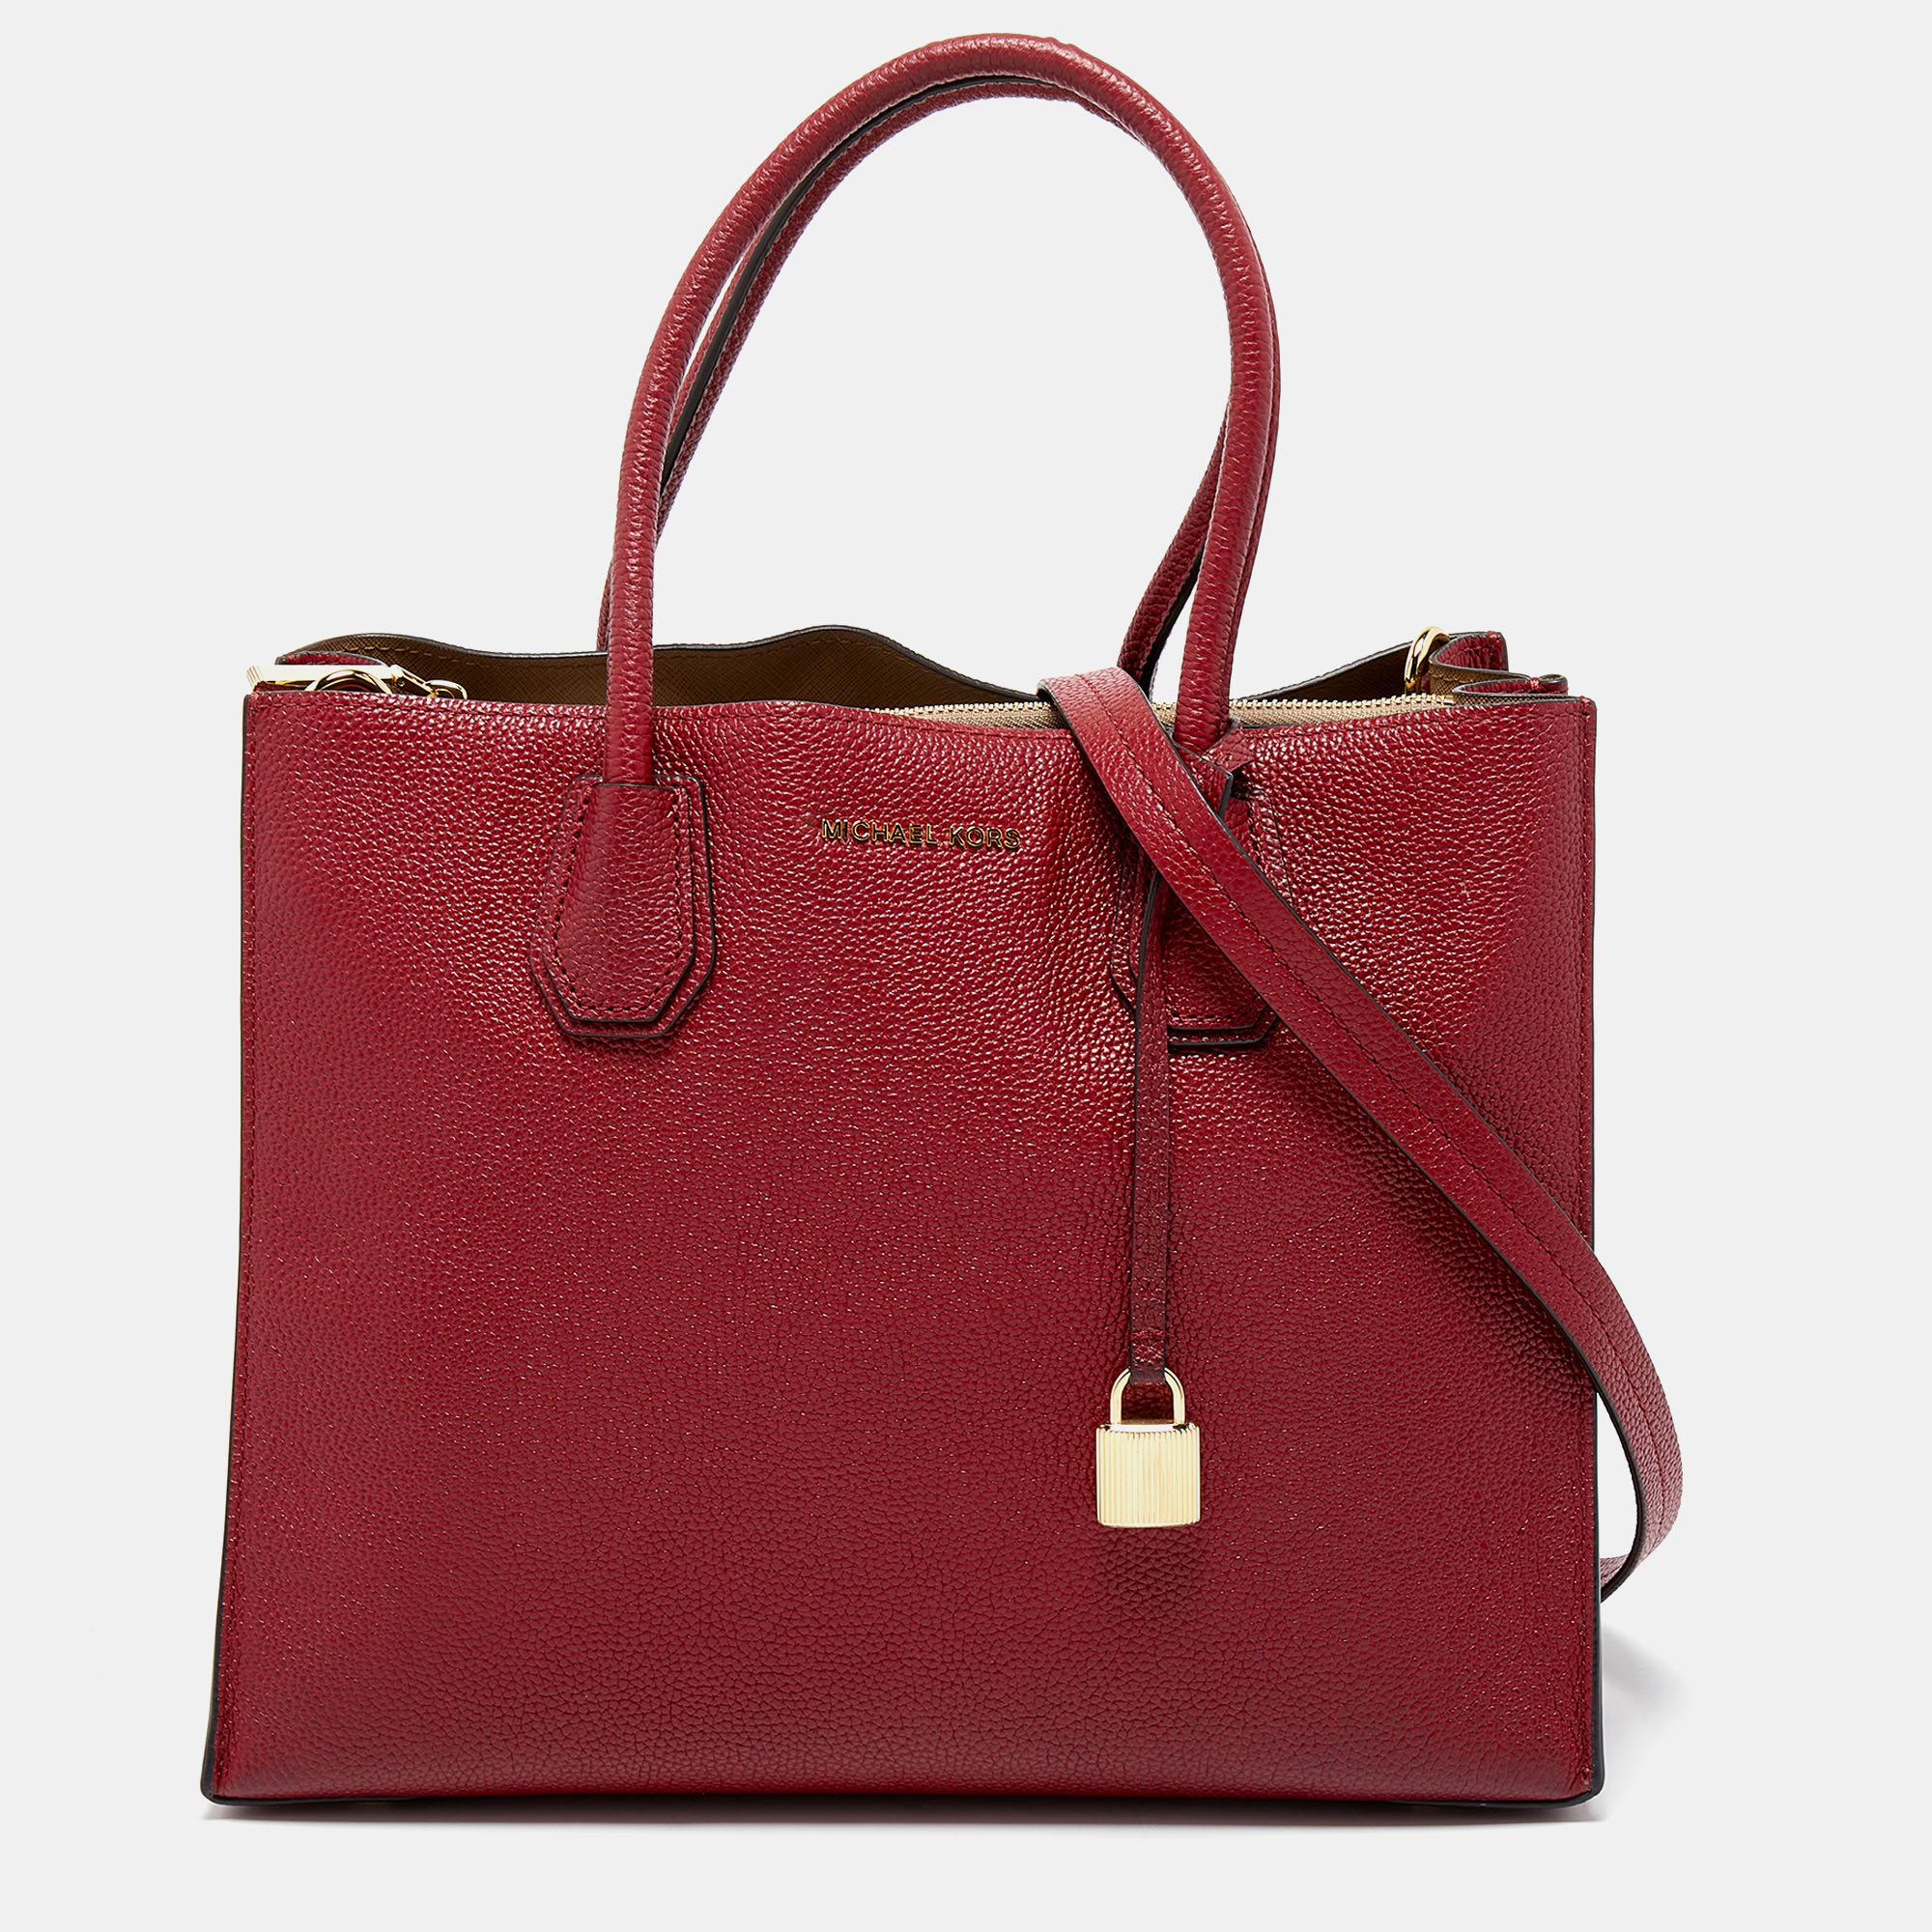 Pre-owned Michael Kors Red Grained Leather Large Mercer Tote